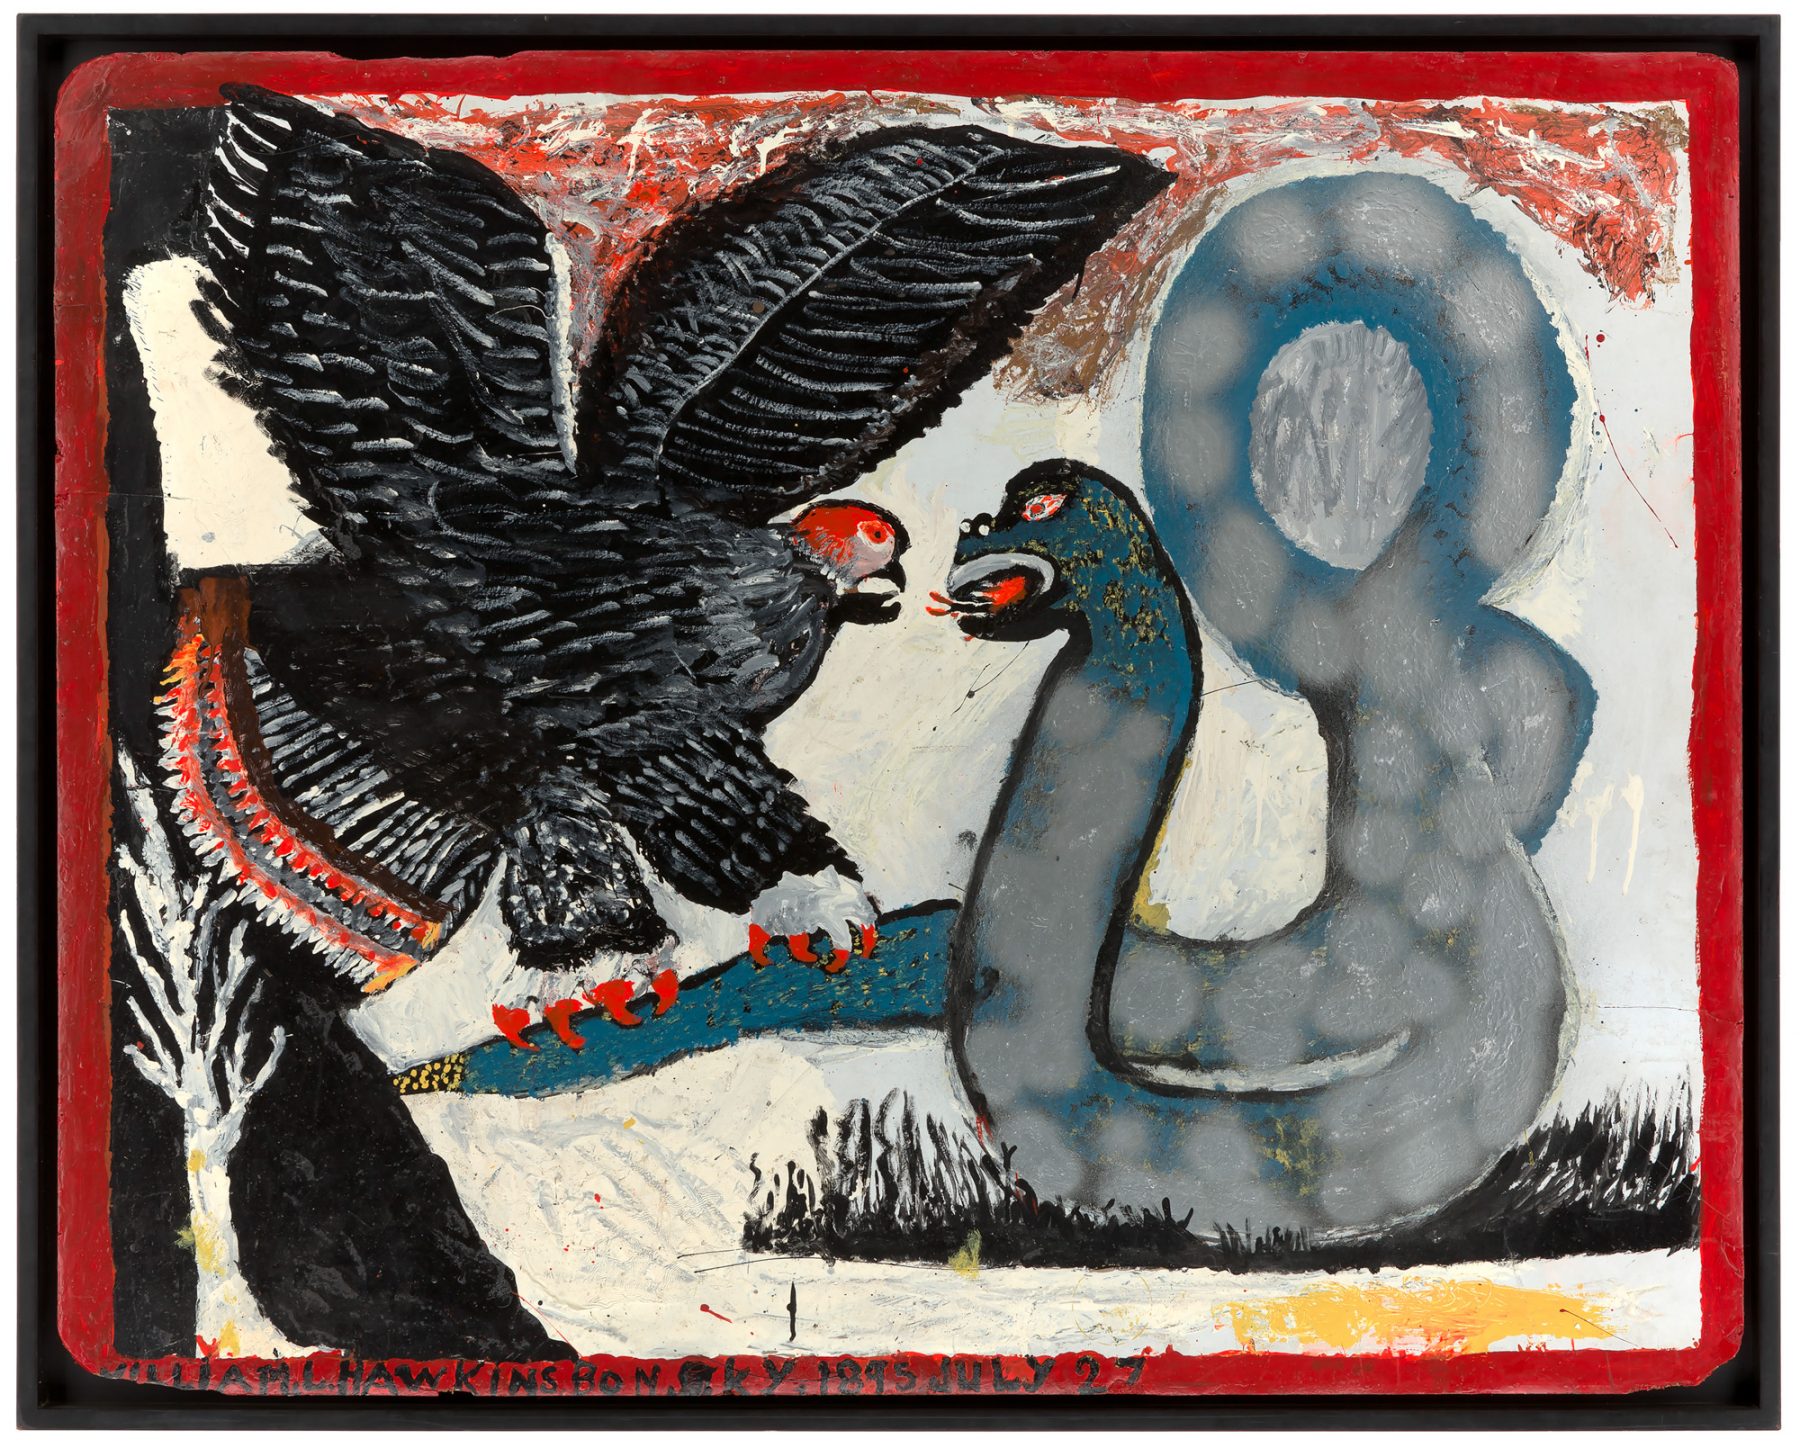 This image, painted with enamel on board features a large eagle spreading its wings face to face with a serpent. The eagle seems to be digging its talons into the serpents tail, as it aggressively shows its tongue to the eagle.